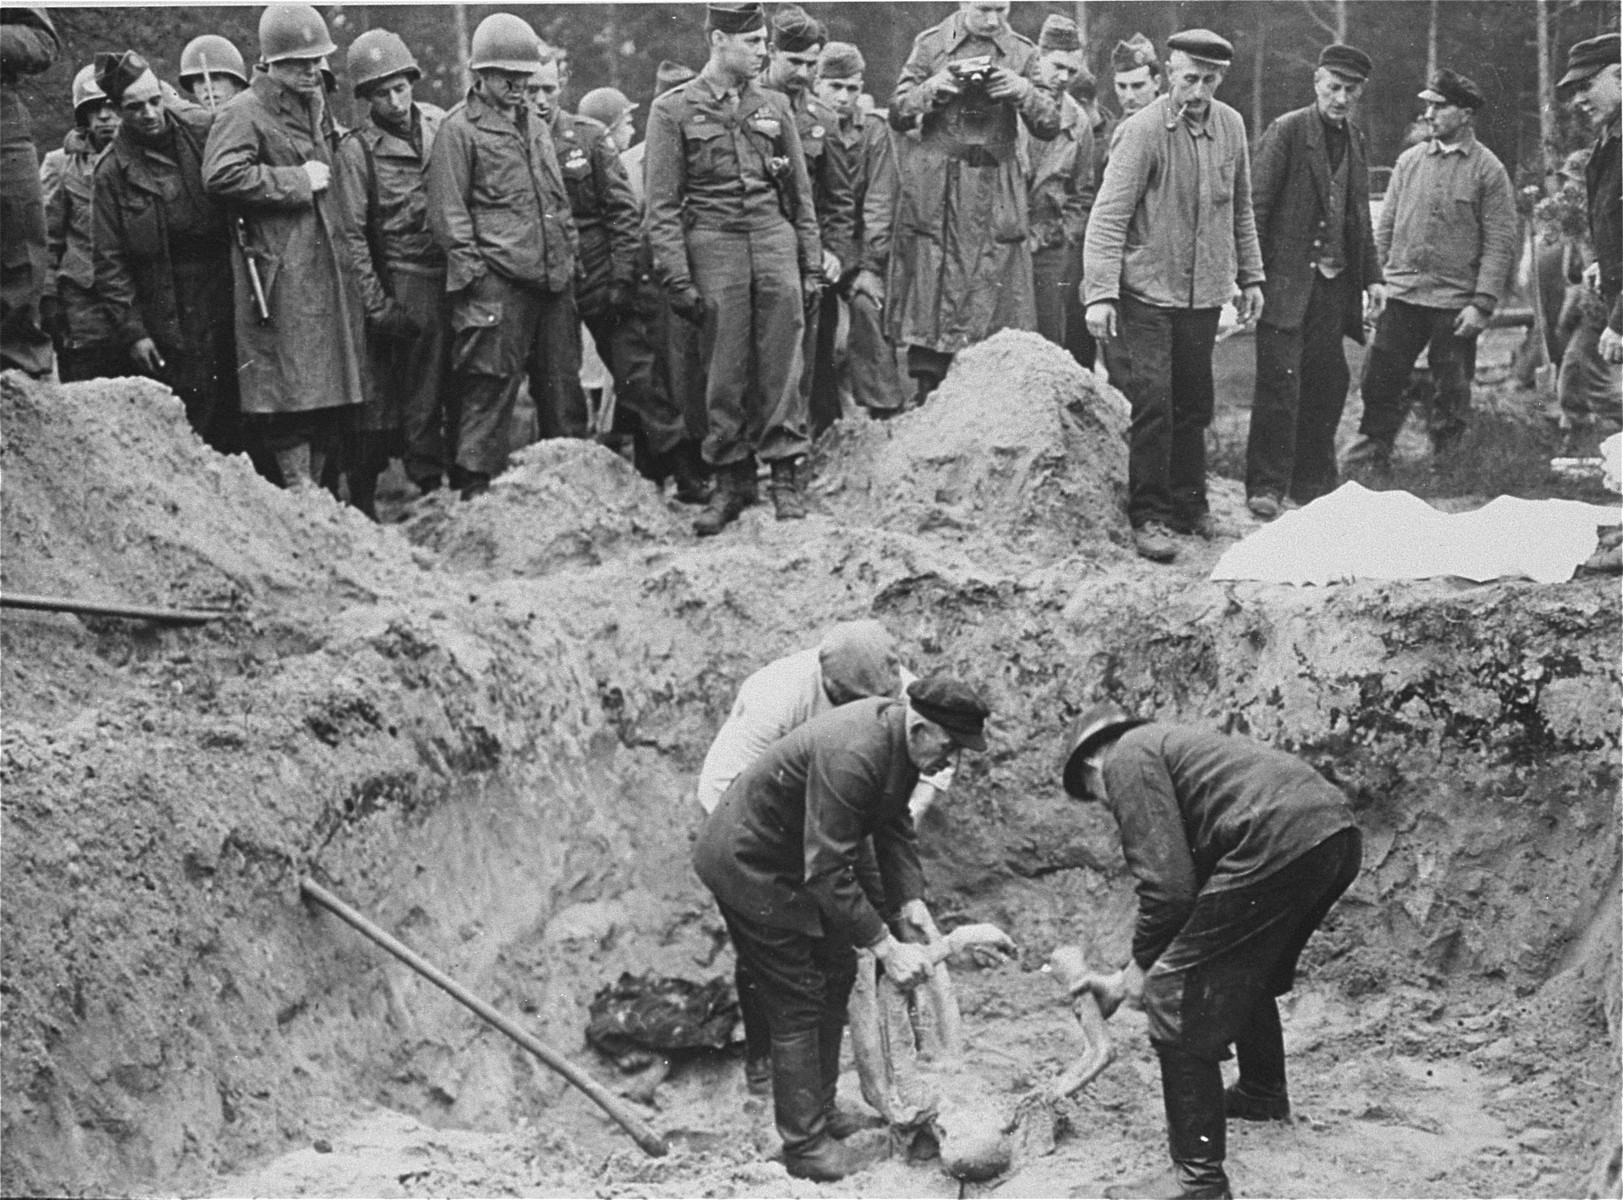 American troops with the 82nd Airborne Division look on as German exhume corpses from a mass grave. 

The original Signal Corps caption "NEW NAZI HORROR CAMP DISCOVERED.  One of the worst Nazi concentration camps uncovered by Allied troops was liberated at Wobbelin, Germany, a small town five miles north of Ludwigslust and 90 miles northwest of Berlin.  Soldiers of three Allied units -- the 82nd U.S. Airborne Division, the Eighth Infantry Division of the Ninth U.S. Army and airborne troops of the Second British Army -- entered the camp and found sick, starving inmates barely surviving under indescribable conditions of filth and squalor.  They found hundreds of dead prisoners in one of the buildings while outside, in a yard, hundreds more  were found hastily buried in huge pits.  One mass grave contained 300 emaciated, disfigured corpses.  The dead included Poles, Russians, Frenchmen, Belgians, Dutchmen and Germans, all of whom had been working as slave laborers for the Nazis.

It is estimated that at least 150 of the original 4,000 prisoners succumbed daily, mostly from starvation and savage treatment at the hands of Nazi SS troops who operated the camp.   Some of the bodies found were burned almost beyond recognition and systematic torture of the inmates was revealed by the  physical condition of most of the survivors.  Military Government officers immediately ordered leading citizens of nearby Ludwigslust and other towns to march through the camp and witness the atrocities committed by representatives of the German Government.  Most of the civilians disclaimed any knowledge of the camp's existence despite the fact that many of the prisoners worked in the area.

The local residents later were made to exhume the bodies from the mass graves at the camp and provide decent, respectable interment of all dead prisoners.  Two hundred were buried in the public square of Ludwigslust May 7, 1945, and an equal number were buried in the garden of the highest Nazi official of Hagenow.  Eighty more were laid to rest in the town of Schwerin.

BIPPA                                                          EA 66636

THIS PHOTO SHOWS:  German civilians of Ludwigslust and nearby communities are forced to exhume the bodies of the Nazi atrocity victims from a mass ... Wobbelin concentration camp.  These ... reburied the victims in the town ... gslust.  Troops of the 82nd U.S. ... witness and direct the proceedings ...
Photo ETO-..."